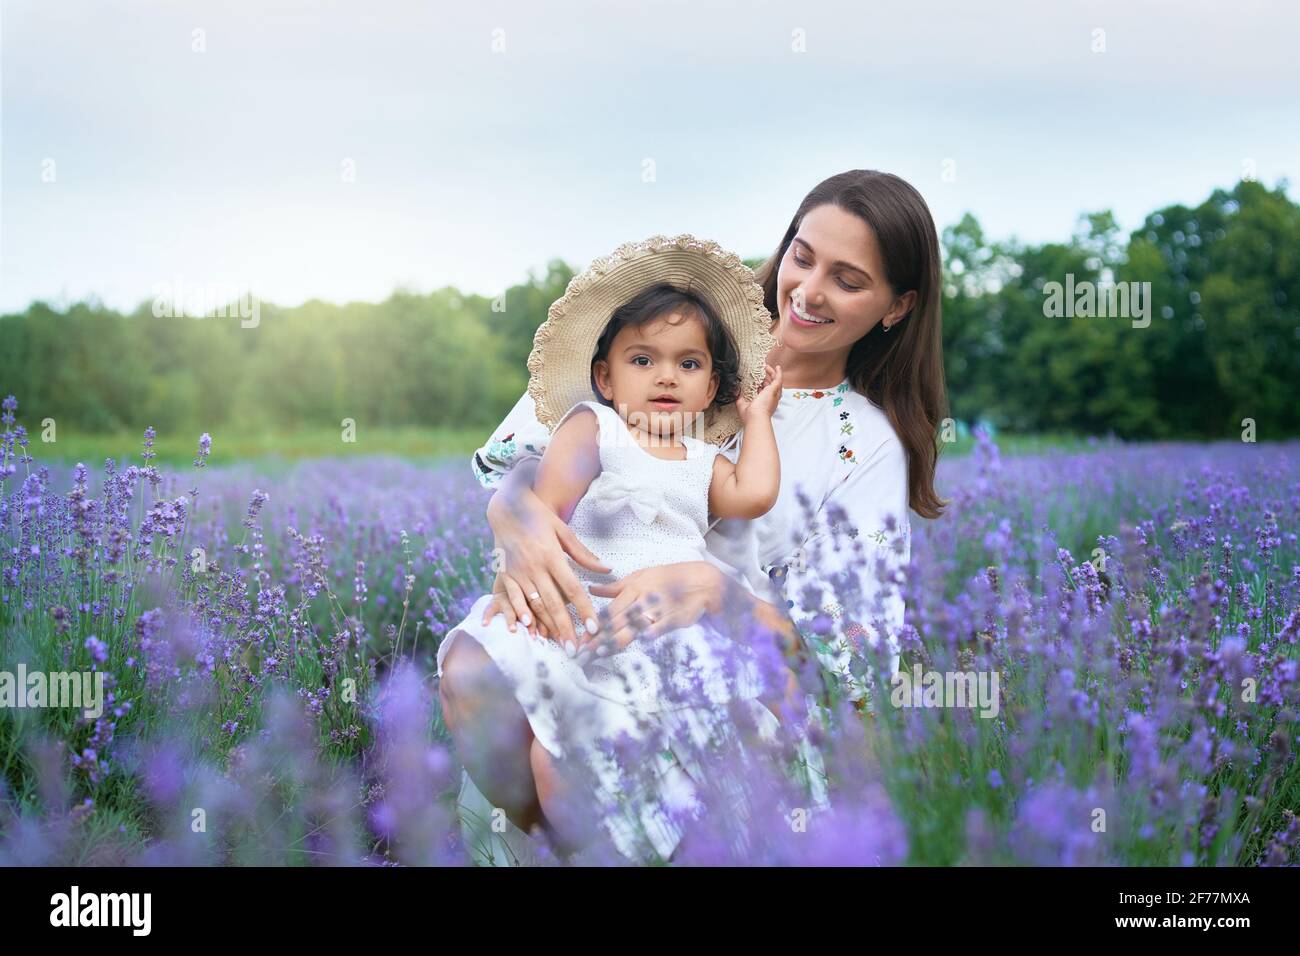 Young happy mother sitting between purple flowers with kid wearing straw hat and looking at camera. Smiling woman posing with baby daughter on knees in lavender field. Concept of nature, motherhood. Stock Photo